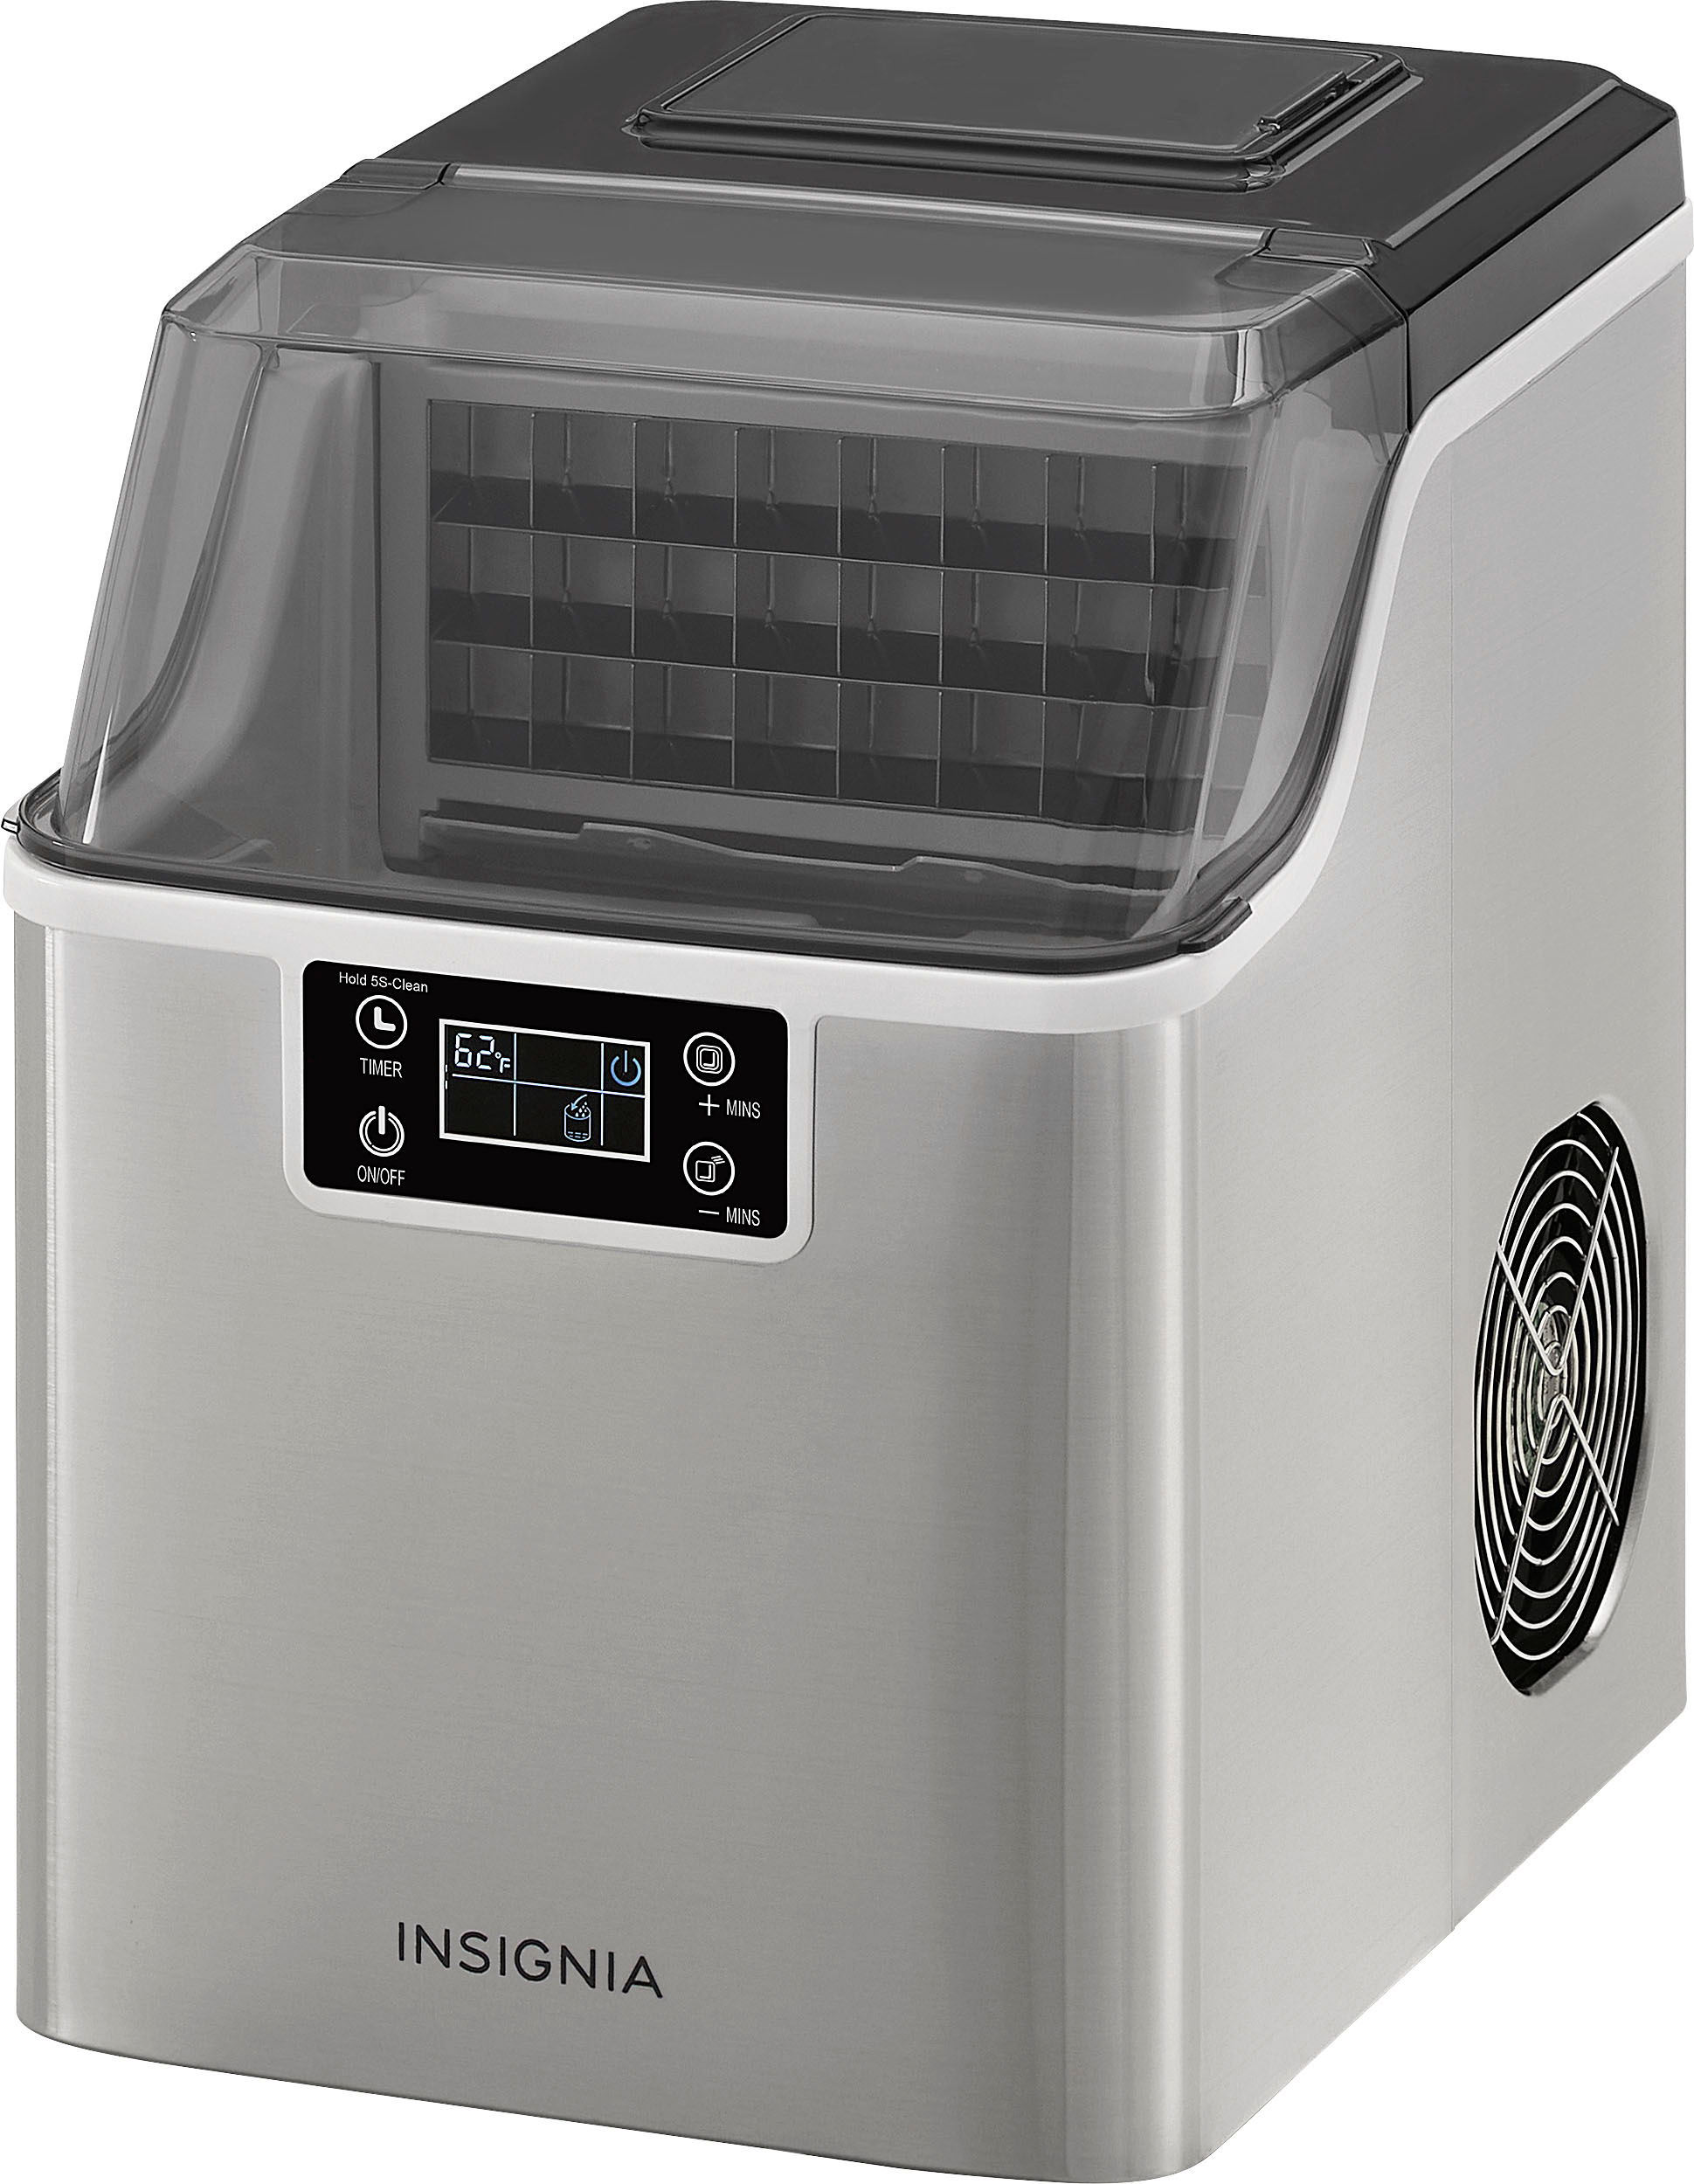 Insignia - 44 lb. Portable Clear Ice Maker with Auto Shut-Off - Stainless Steel